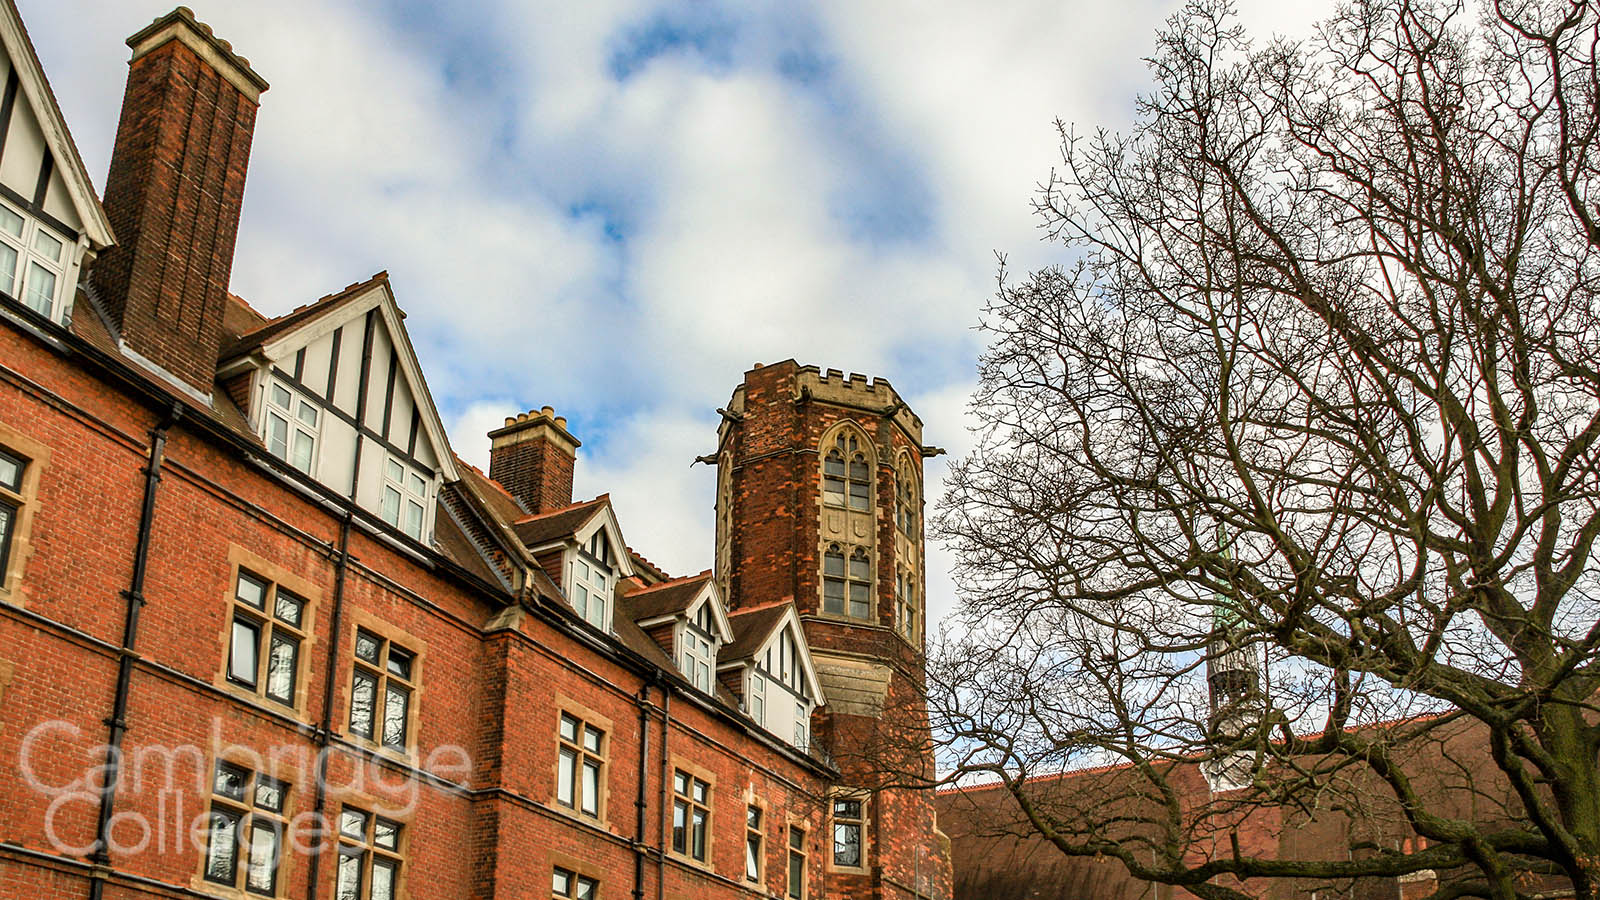 Turreted tower at Homerton College